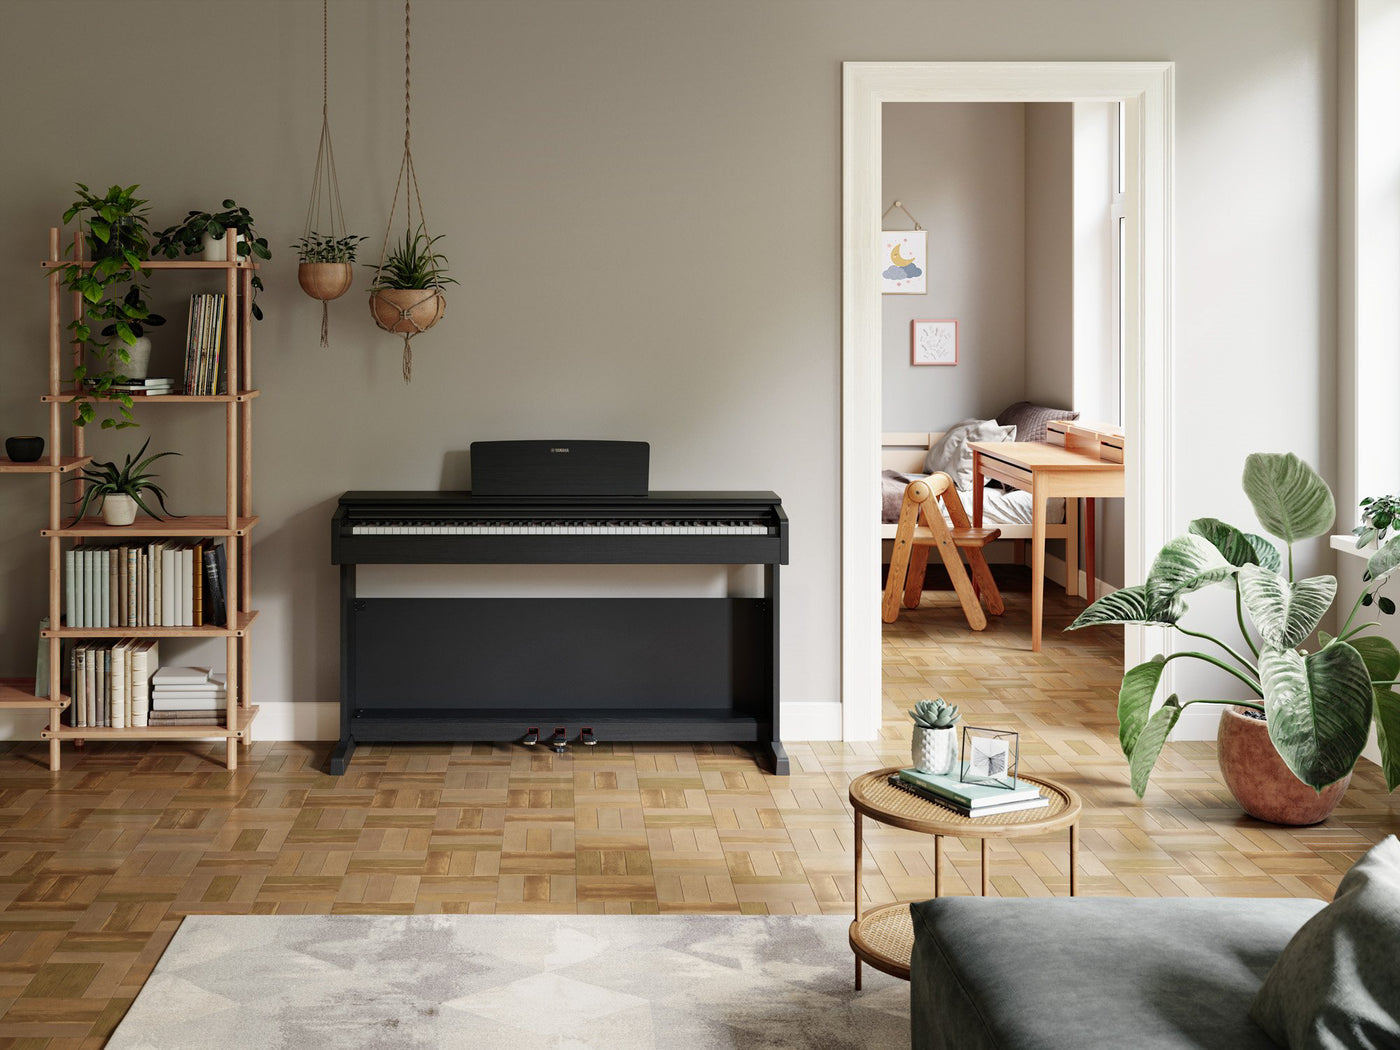 Modern digital piano situated in a cozy living room setting with a shelving unit filled with books, indoor plants on a stand, and a small study area visible through an open door in the background.